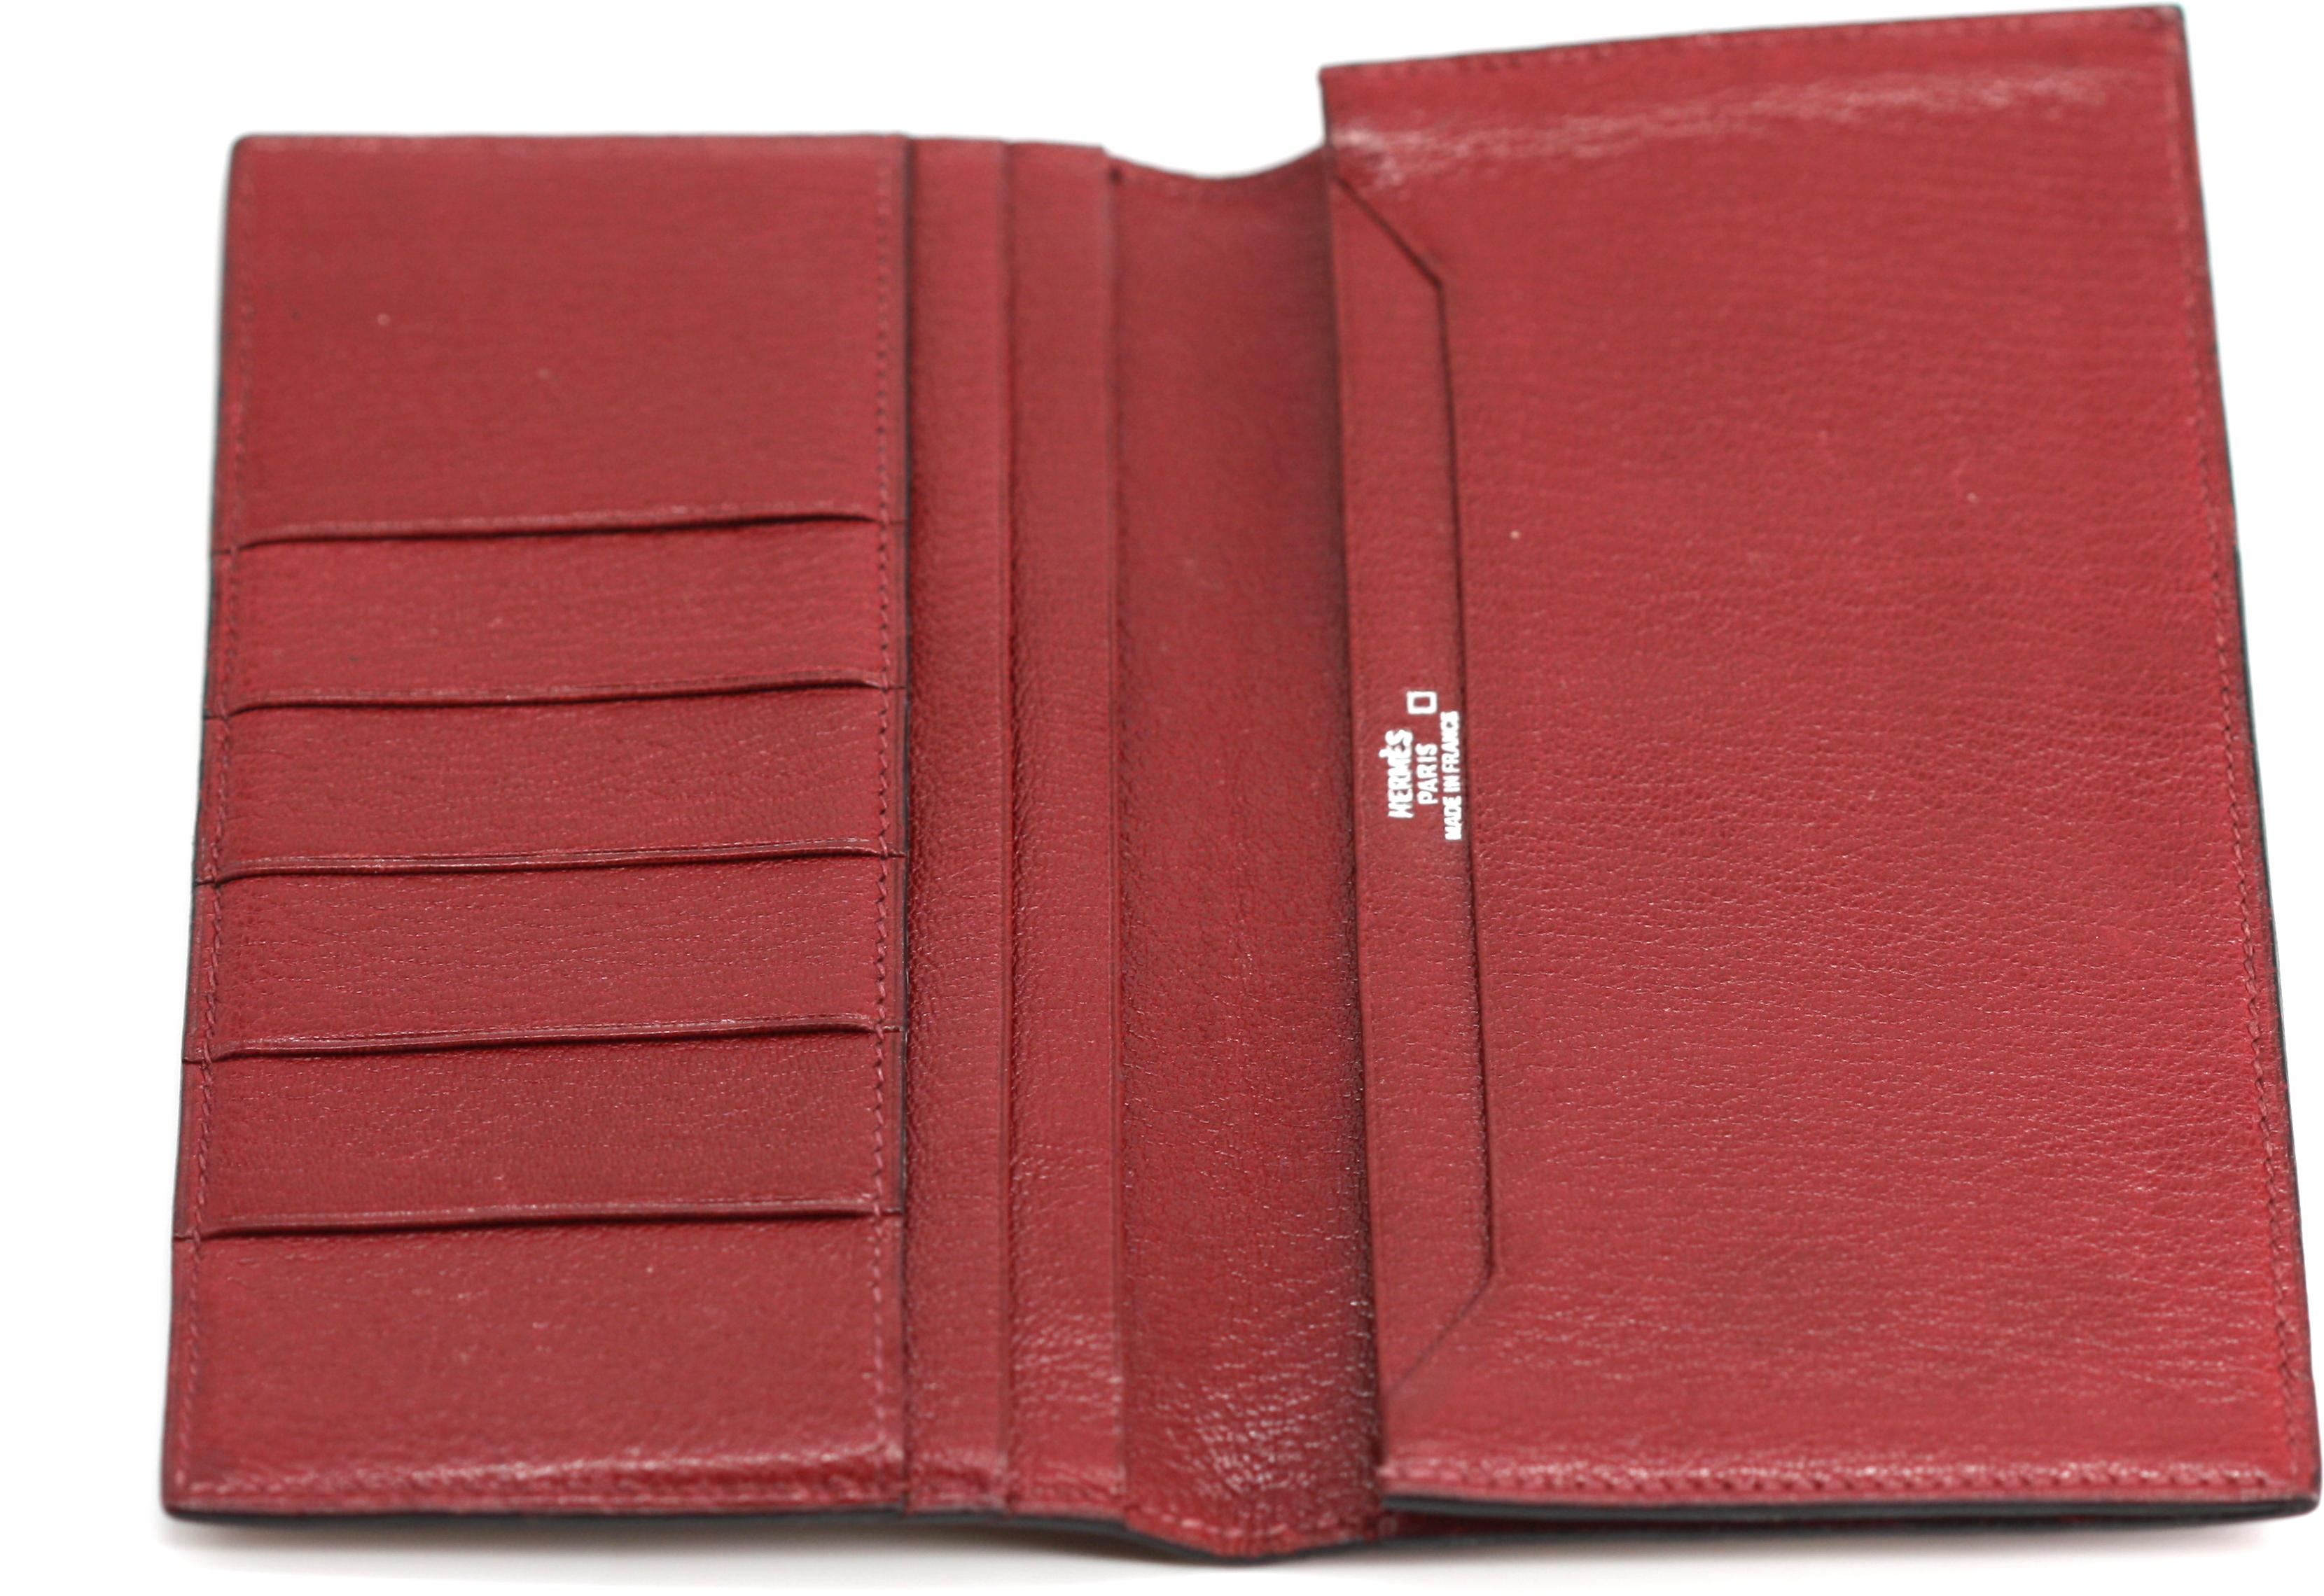  Hermes Red Crocodile Leather Billfold In Good Condition For Sale In West Palm Beach, FL